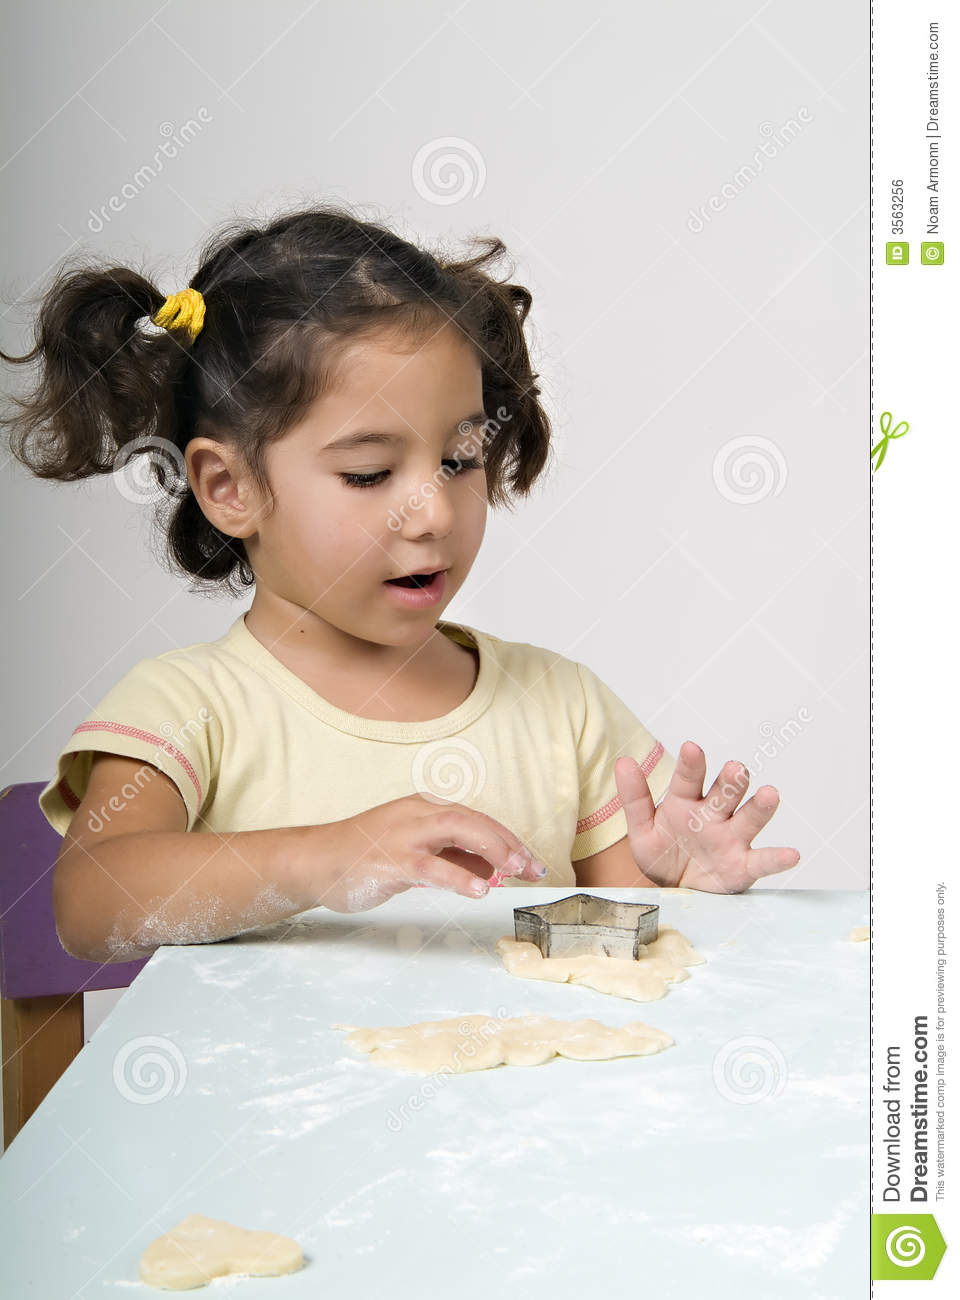 Little Girl Making Cookies Royalty Free Stock Image   Image  3563256